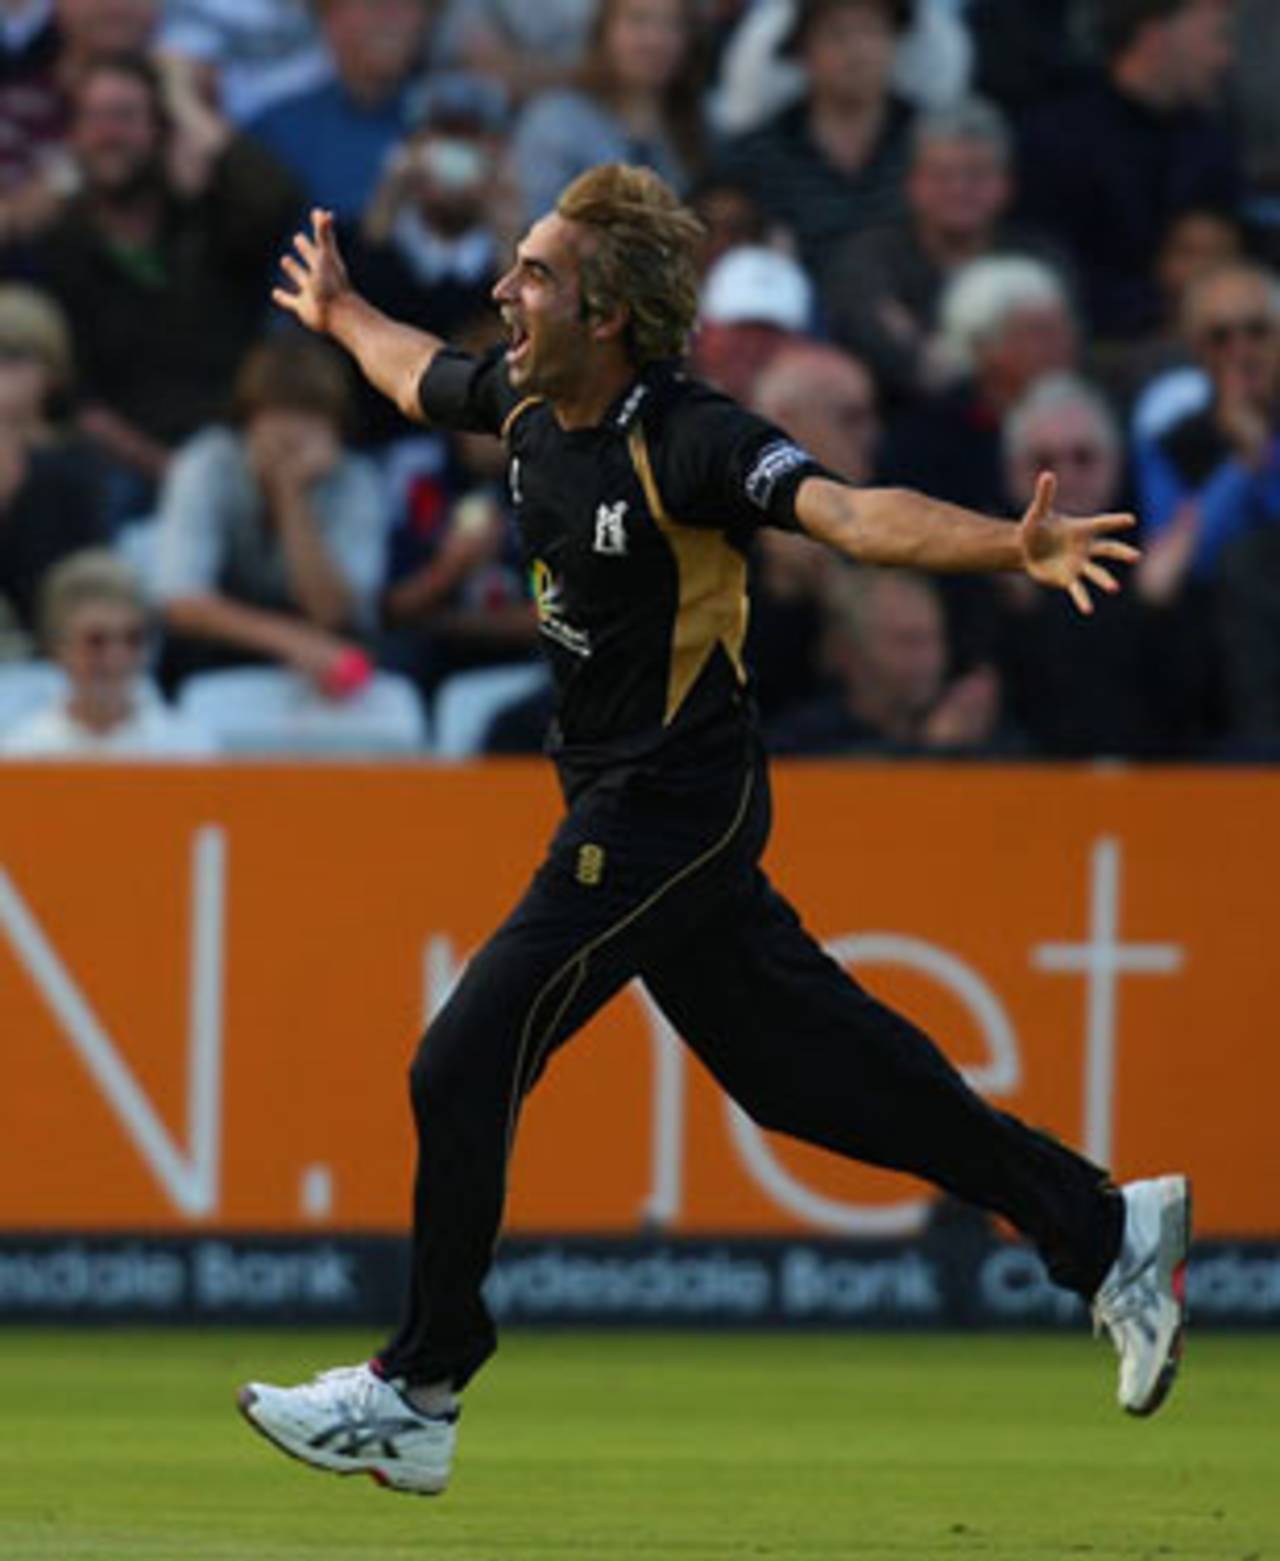 Imran Tahir sets off in celebration after another wicket, Somerset v Warwickshire, CB40 final, Lord's, September 18, 2010